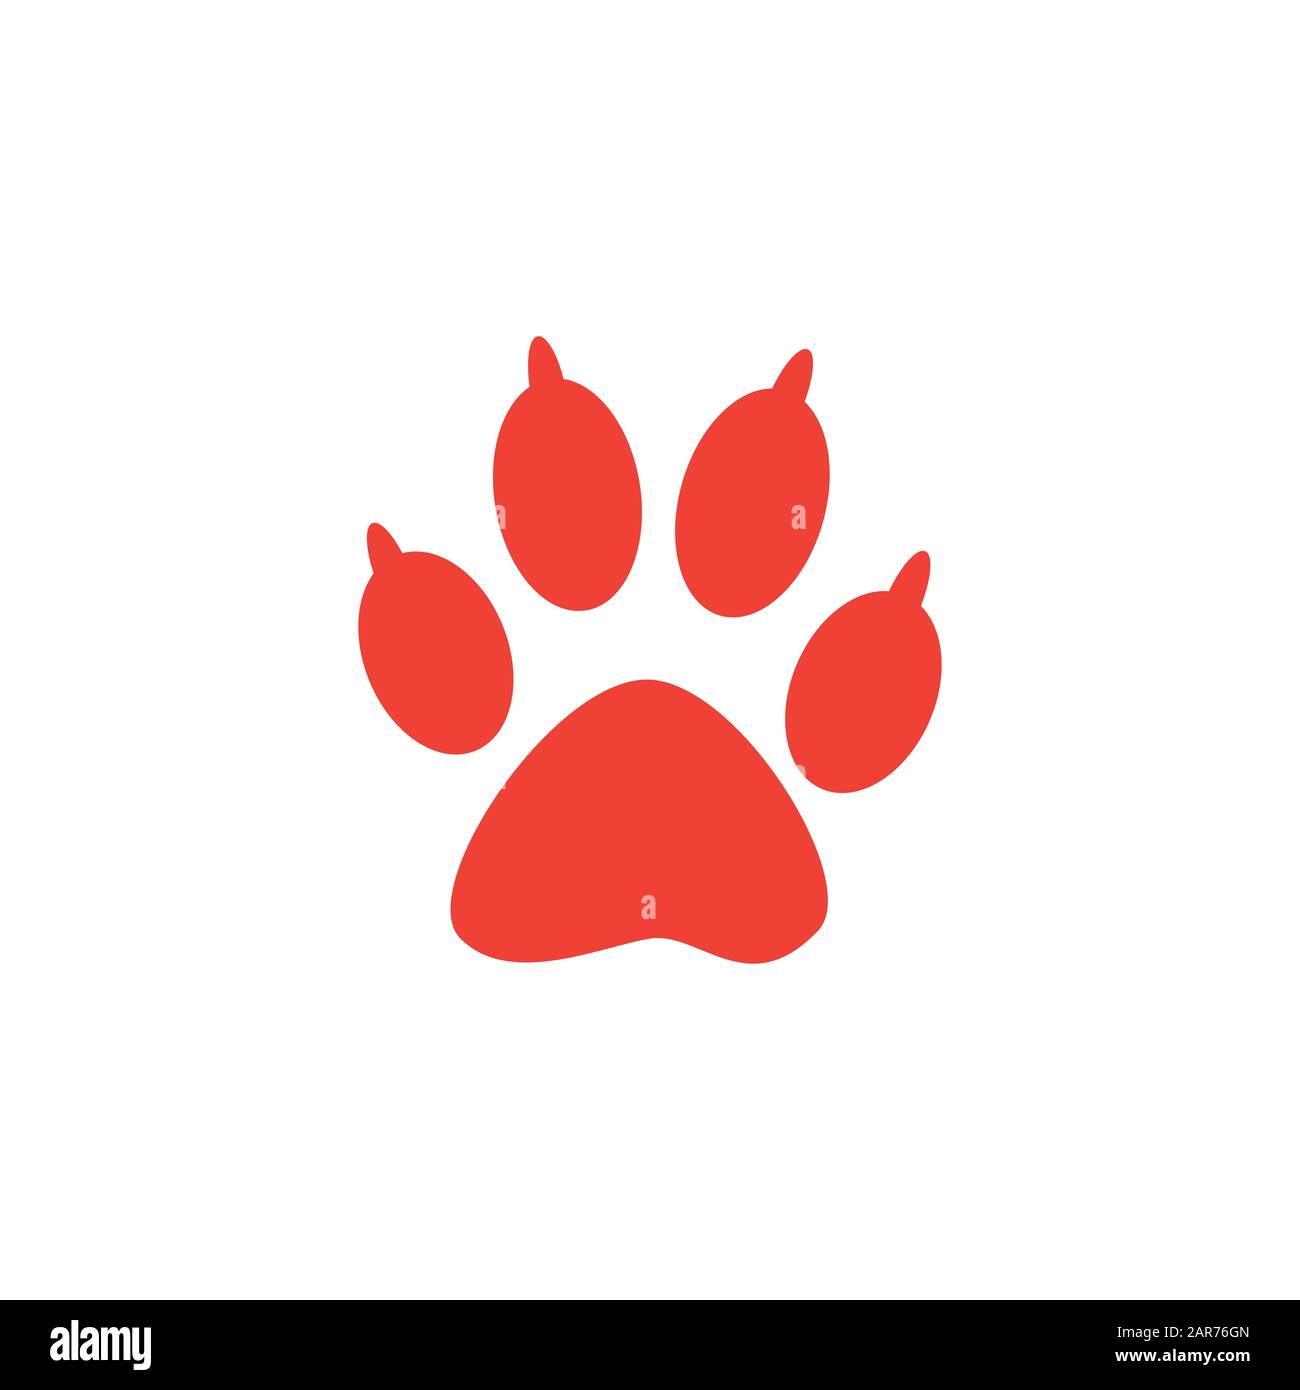 Paw Print Illustration High Resolution Stock Photography and - Alamy